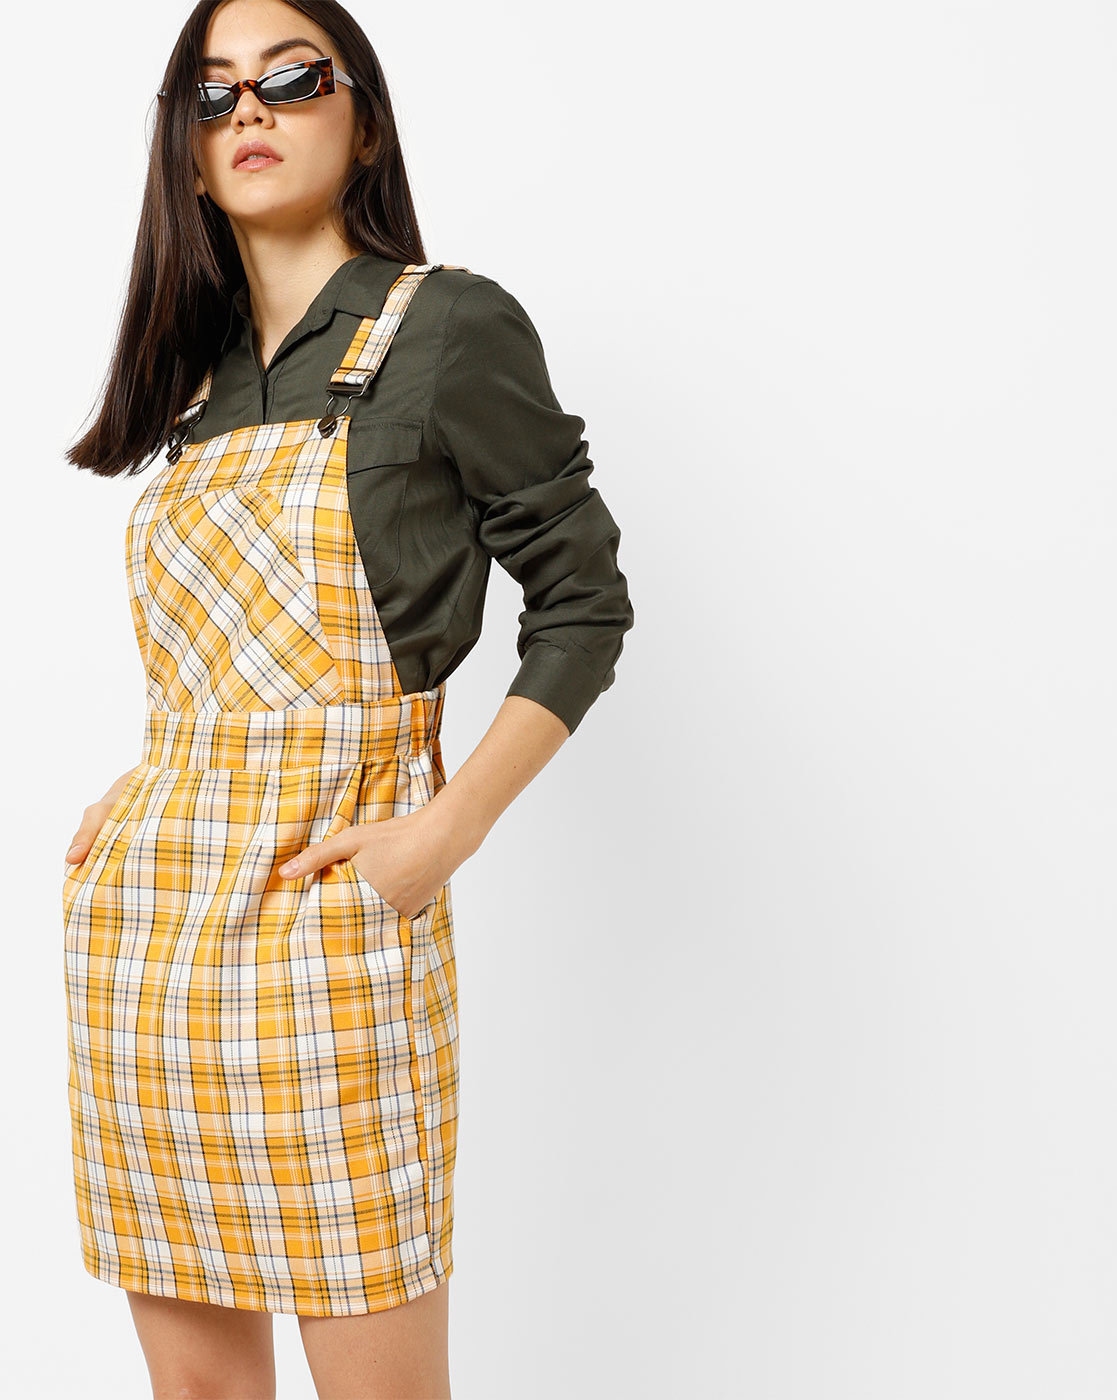 pinafore dresses for adults